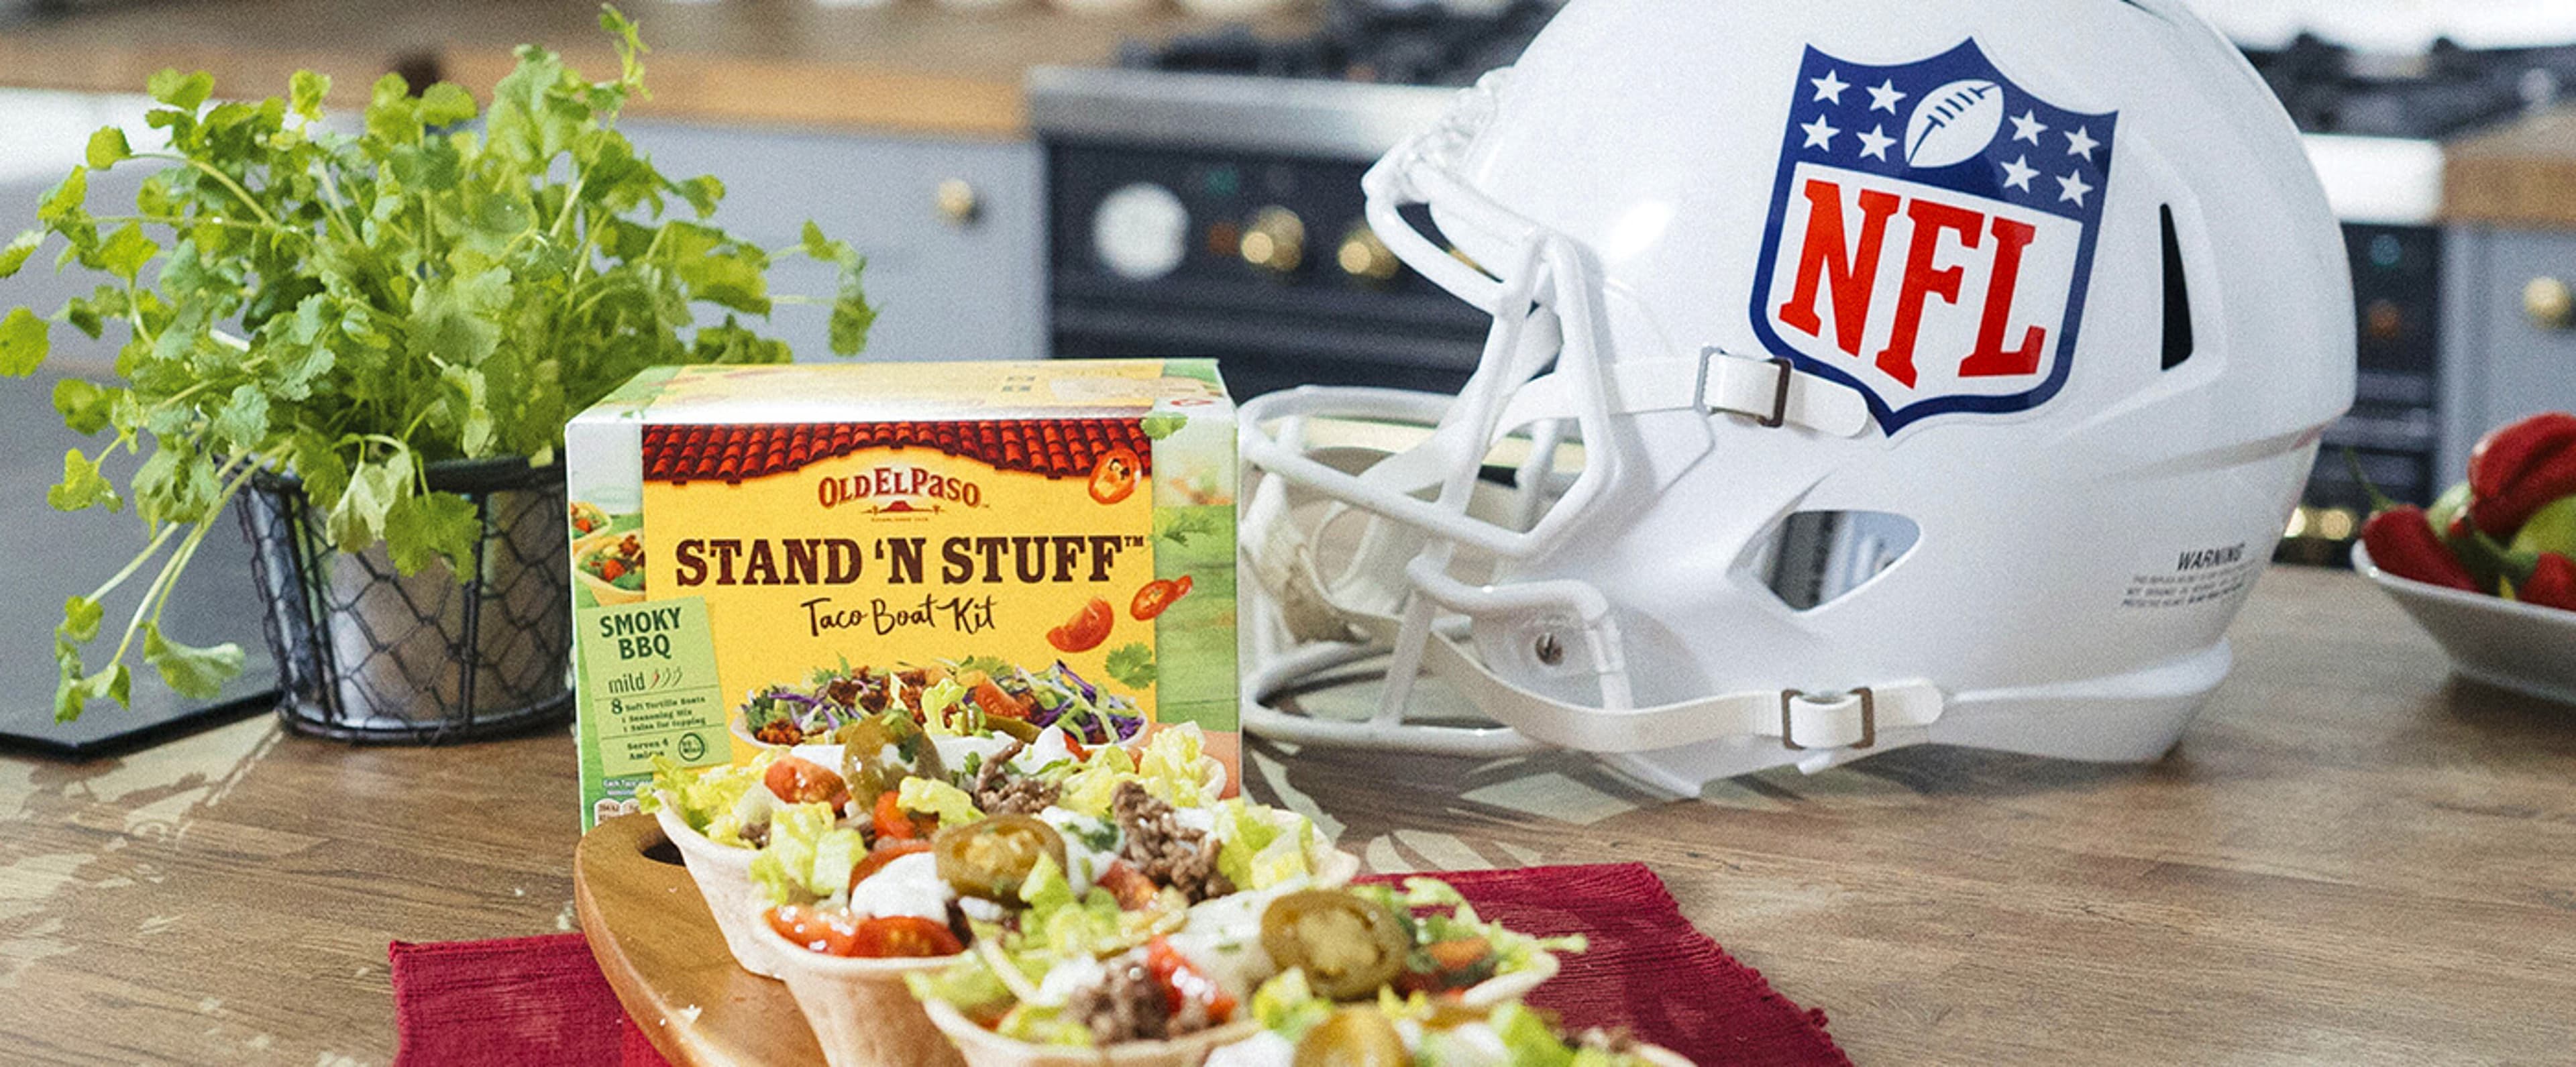 General Mills adds new meal kits and sauces to Old El Paso line-up -  FoodBev Media